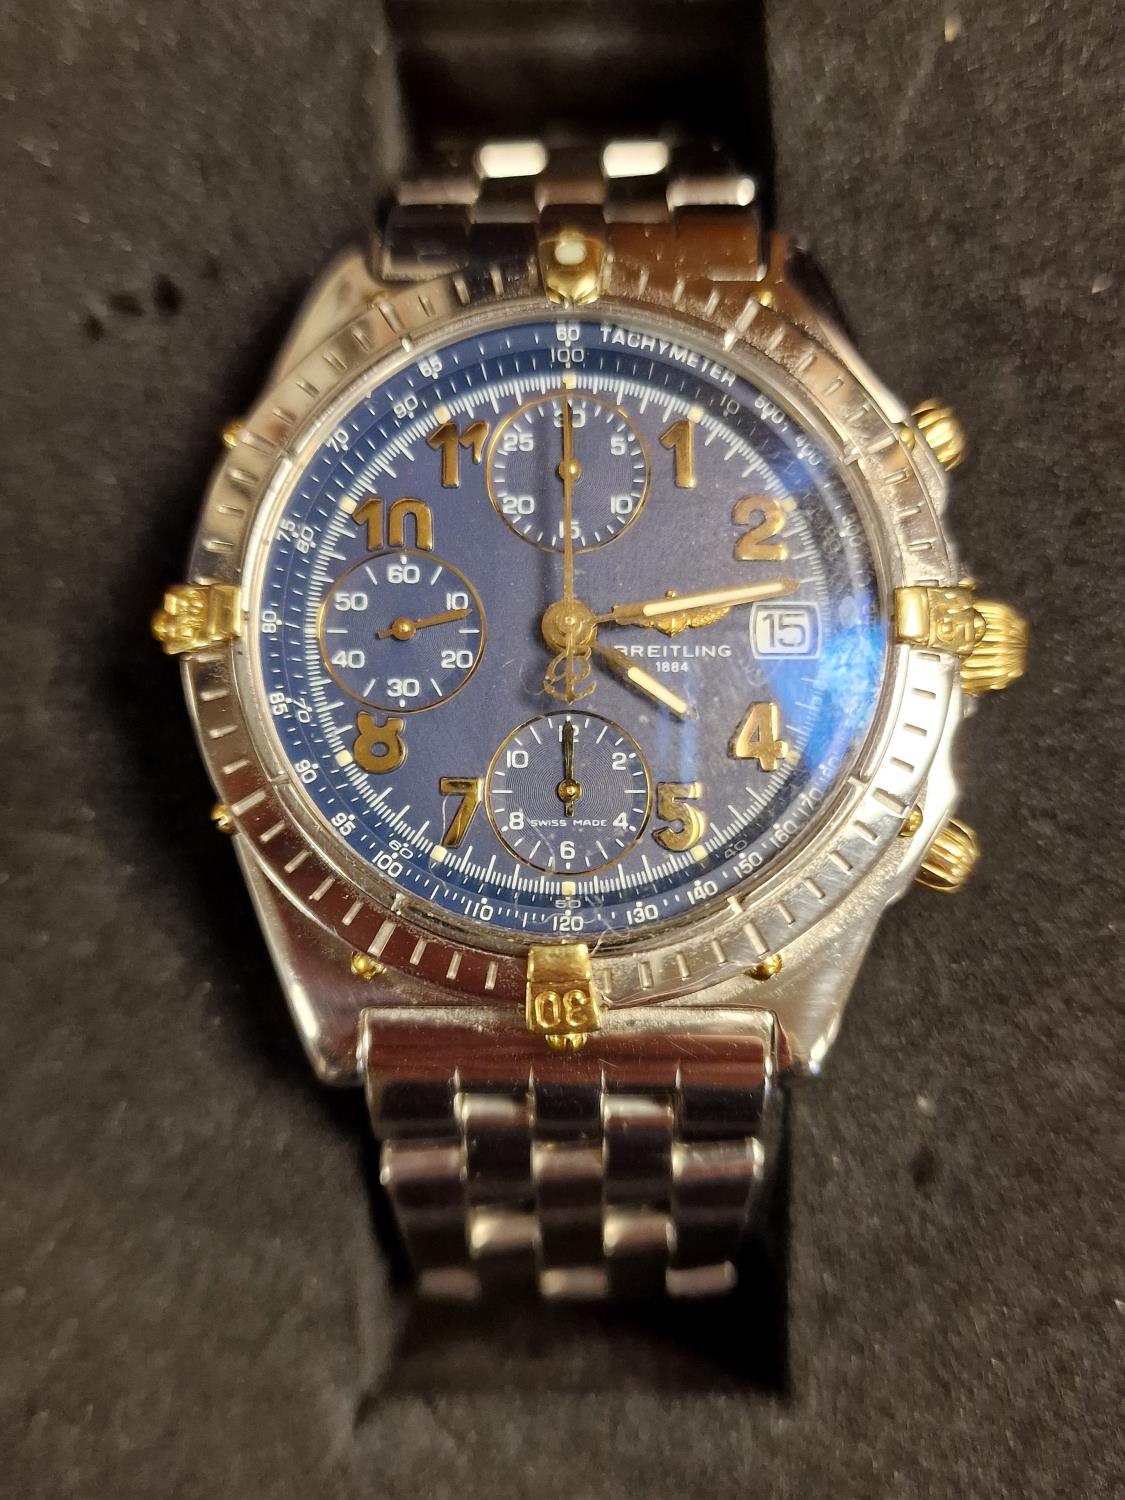 Boxed Breitling Designer Wrist Watch - Image 2 of 5